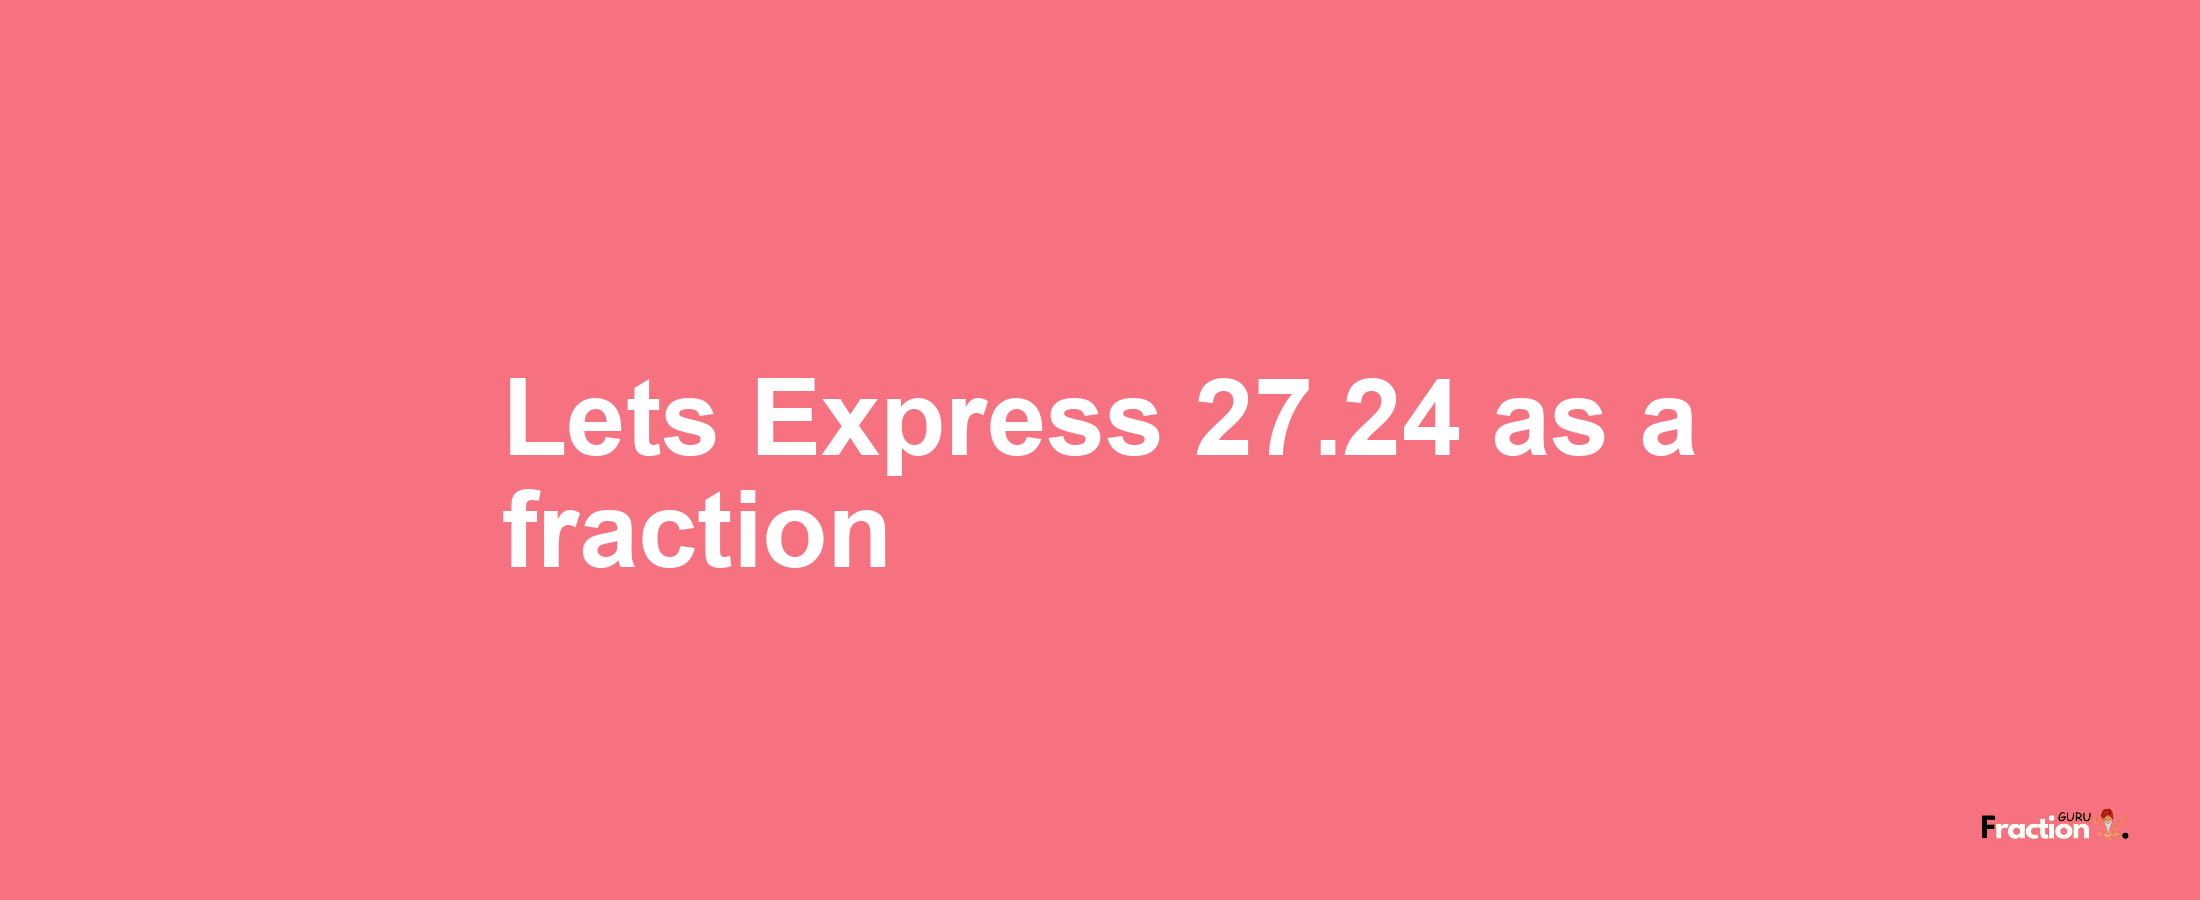 Lets Express 27.24 as afraction